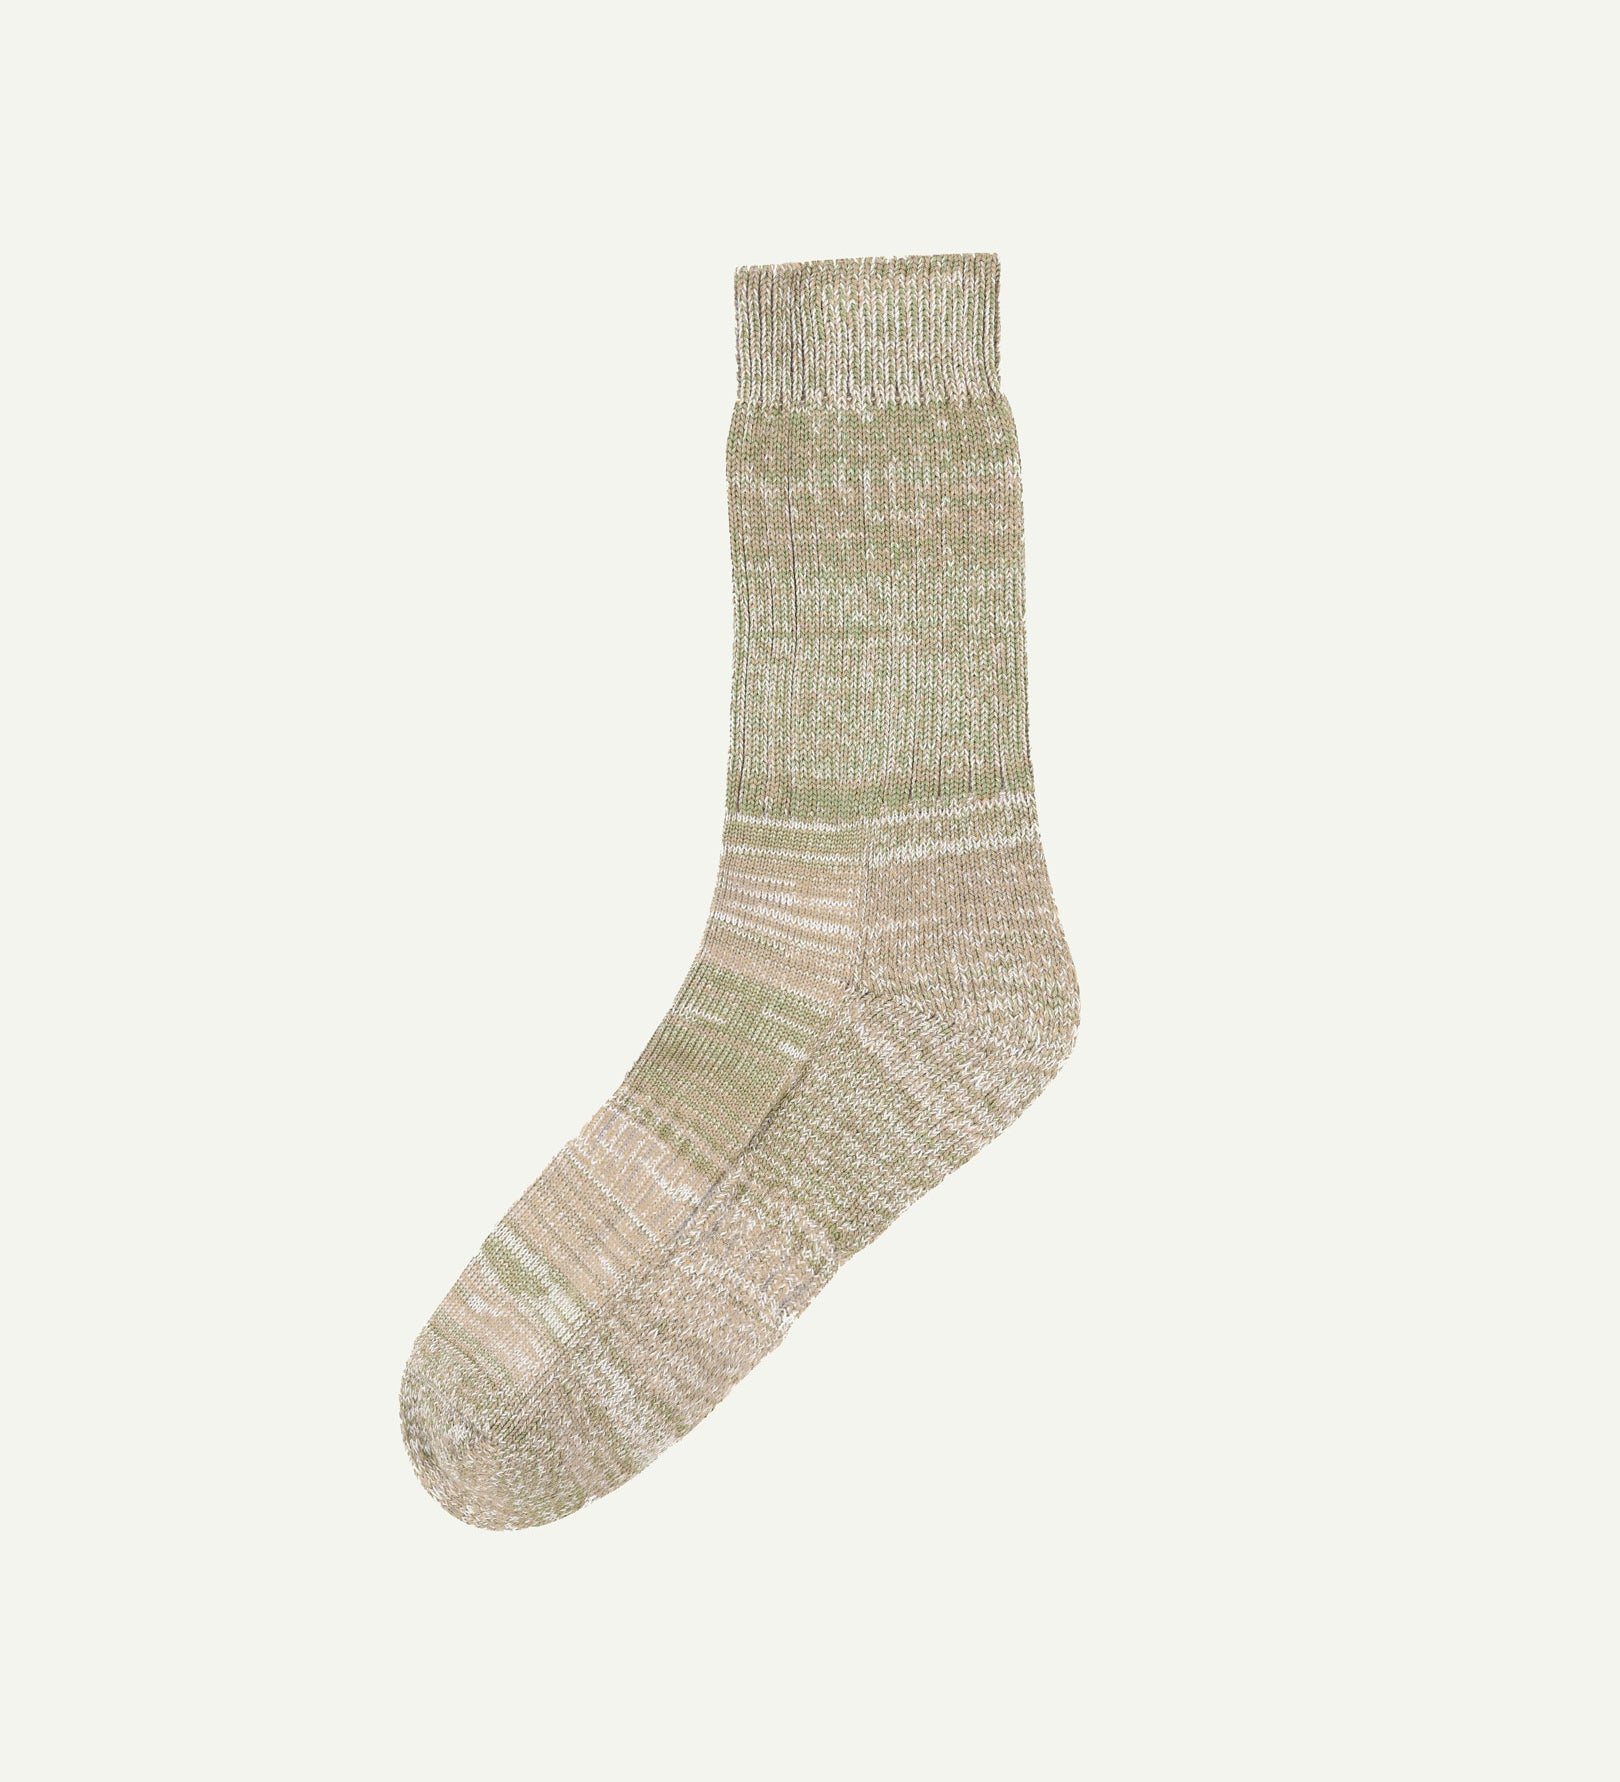 Flat view of Uskees 4006 khaki mix organic cotton sock, showing bands of khaki-green, black and beige.